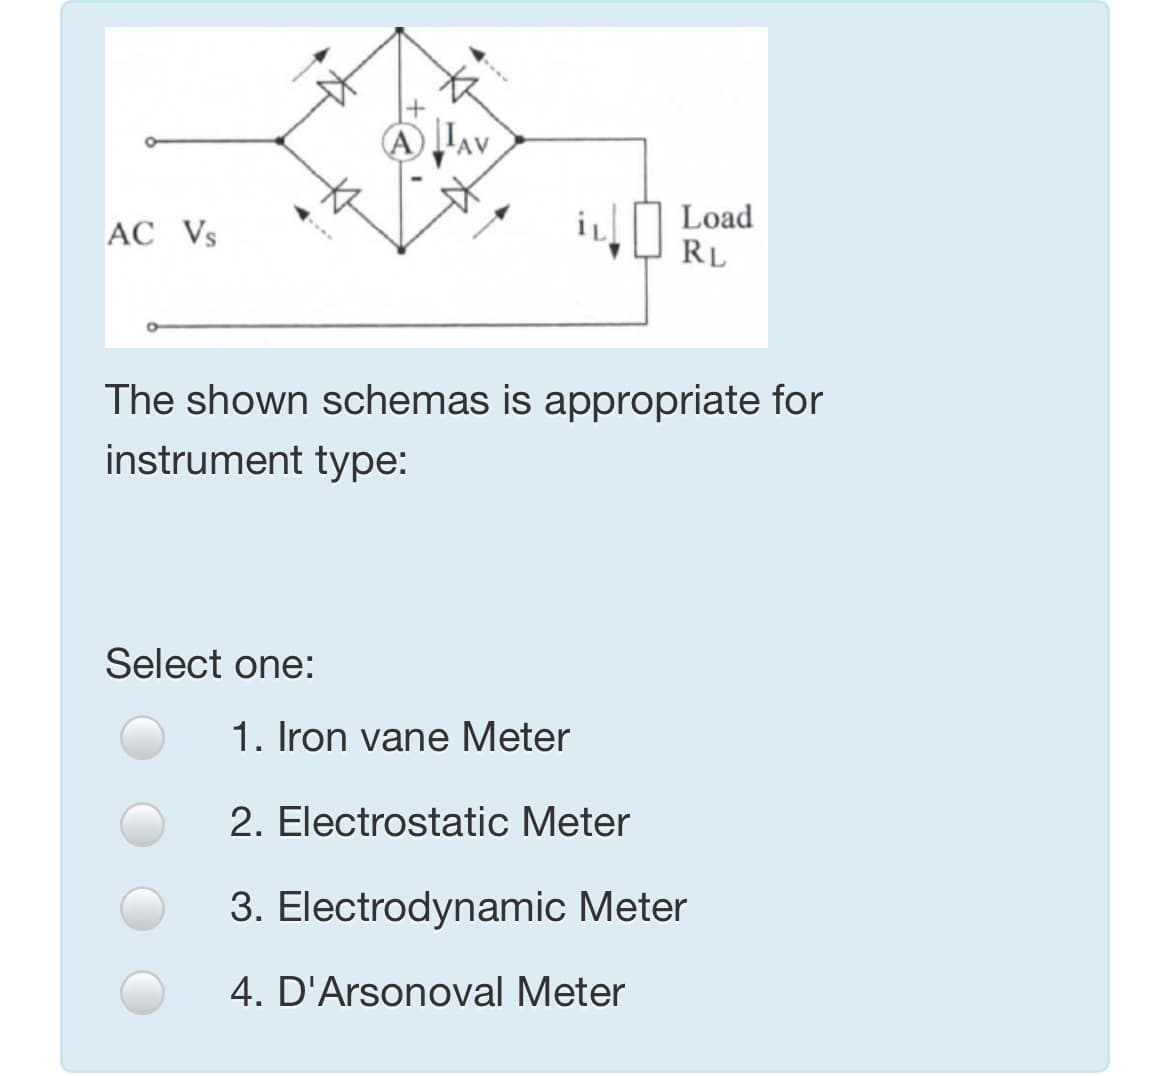 i4 Load
AC Vs
RL
The shown schemas is appropriate for
instrument type:
Select one:
1. Iron vane Meter
2. Electrostatic Meter
3. Electrodynamic Meter
4. D'Arsonoval Meter
